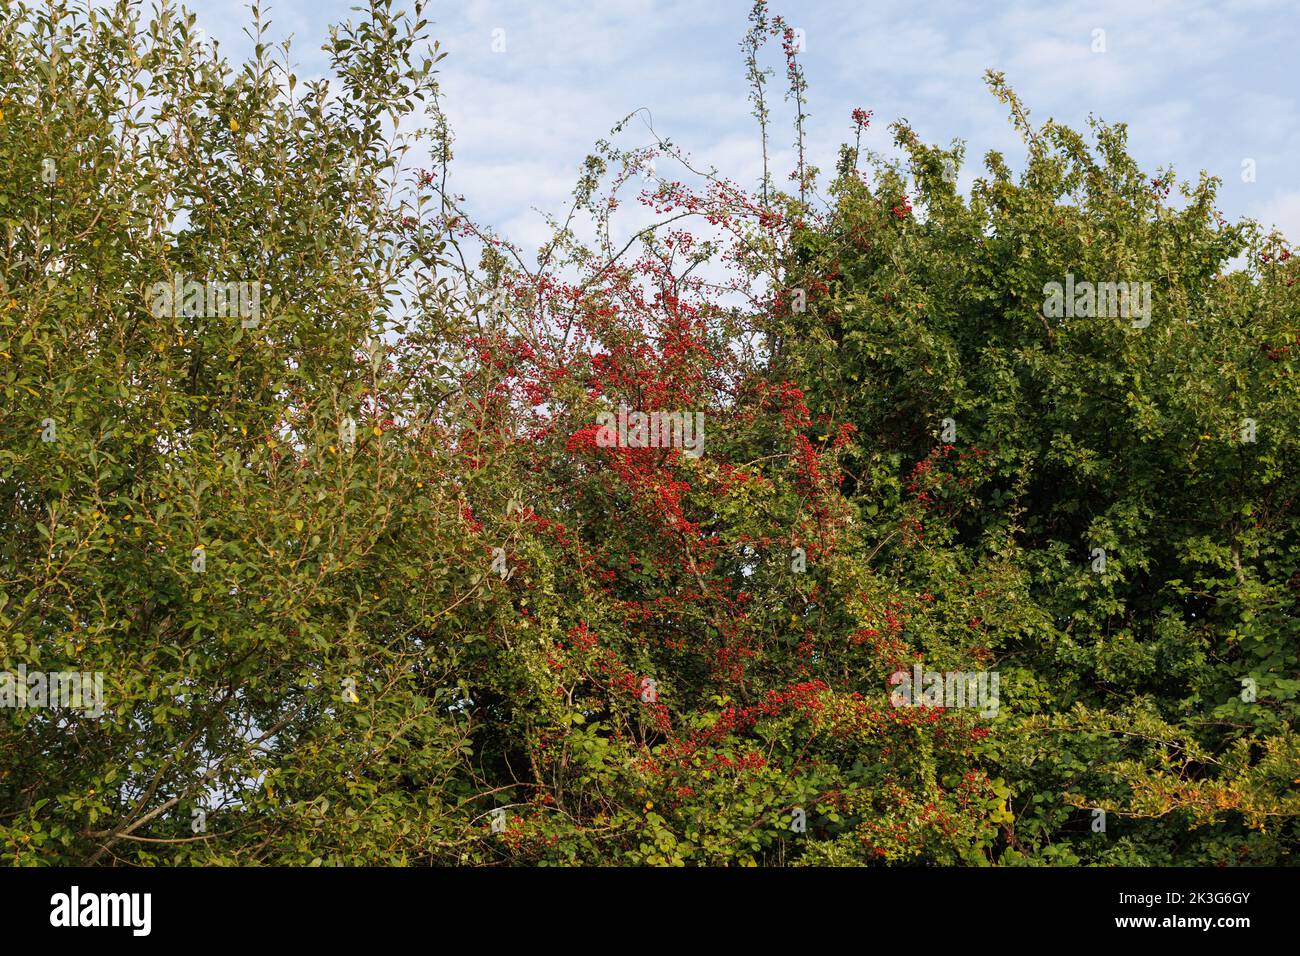 Red berries on a Hawthorn bush in a hedgerow in the British countryside Stock Photo